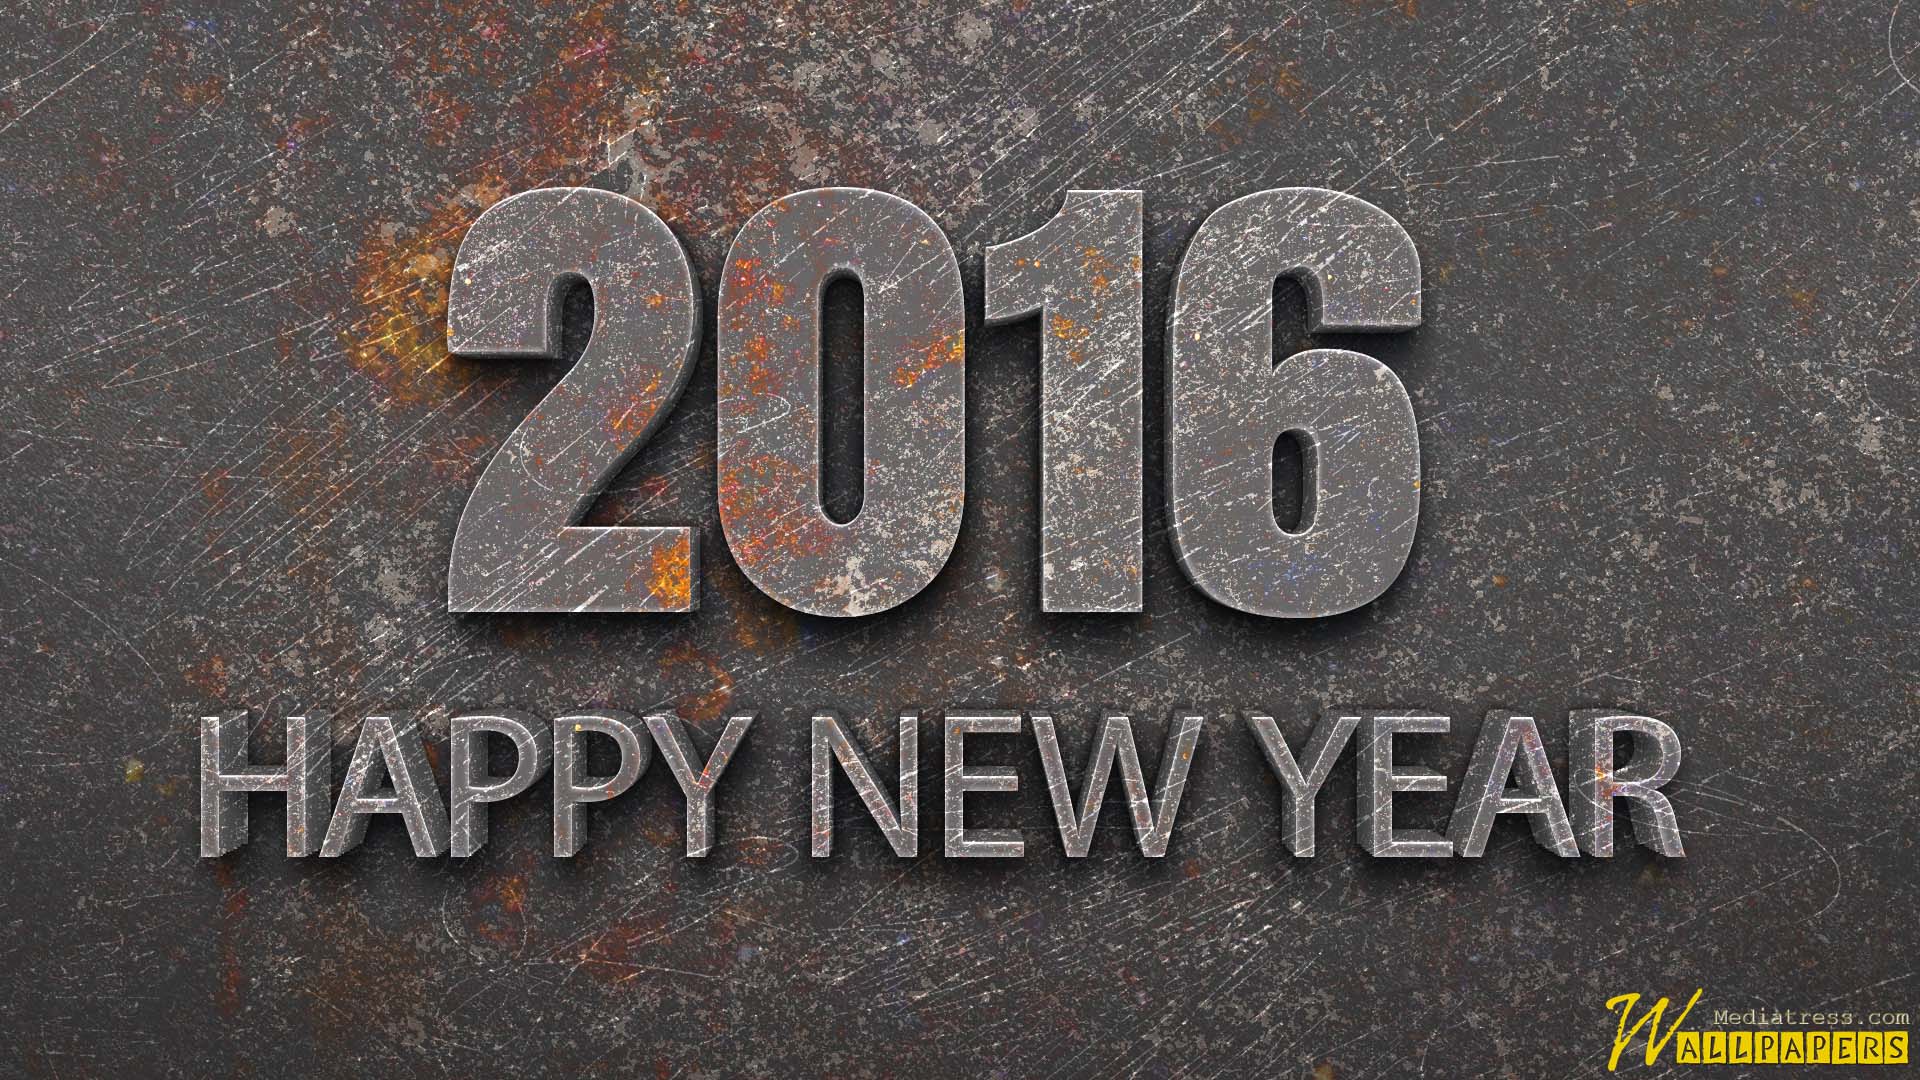 3D Iron New Year 2016 Wallpaper Free For Windo Wallpaper